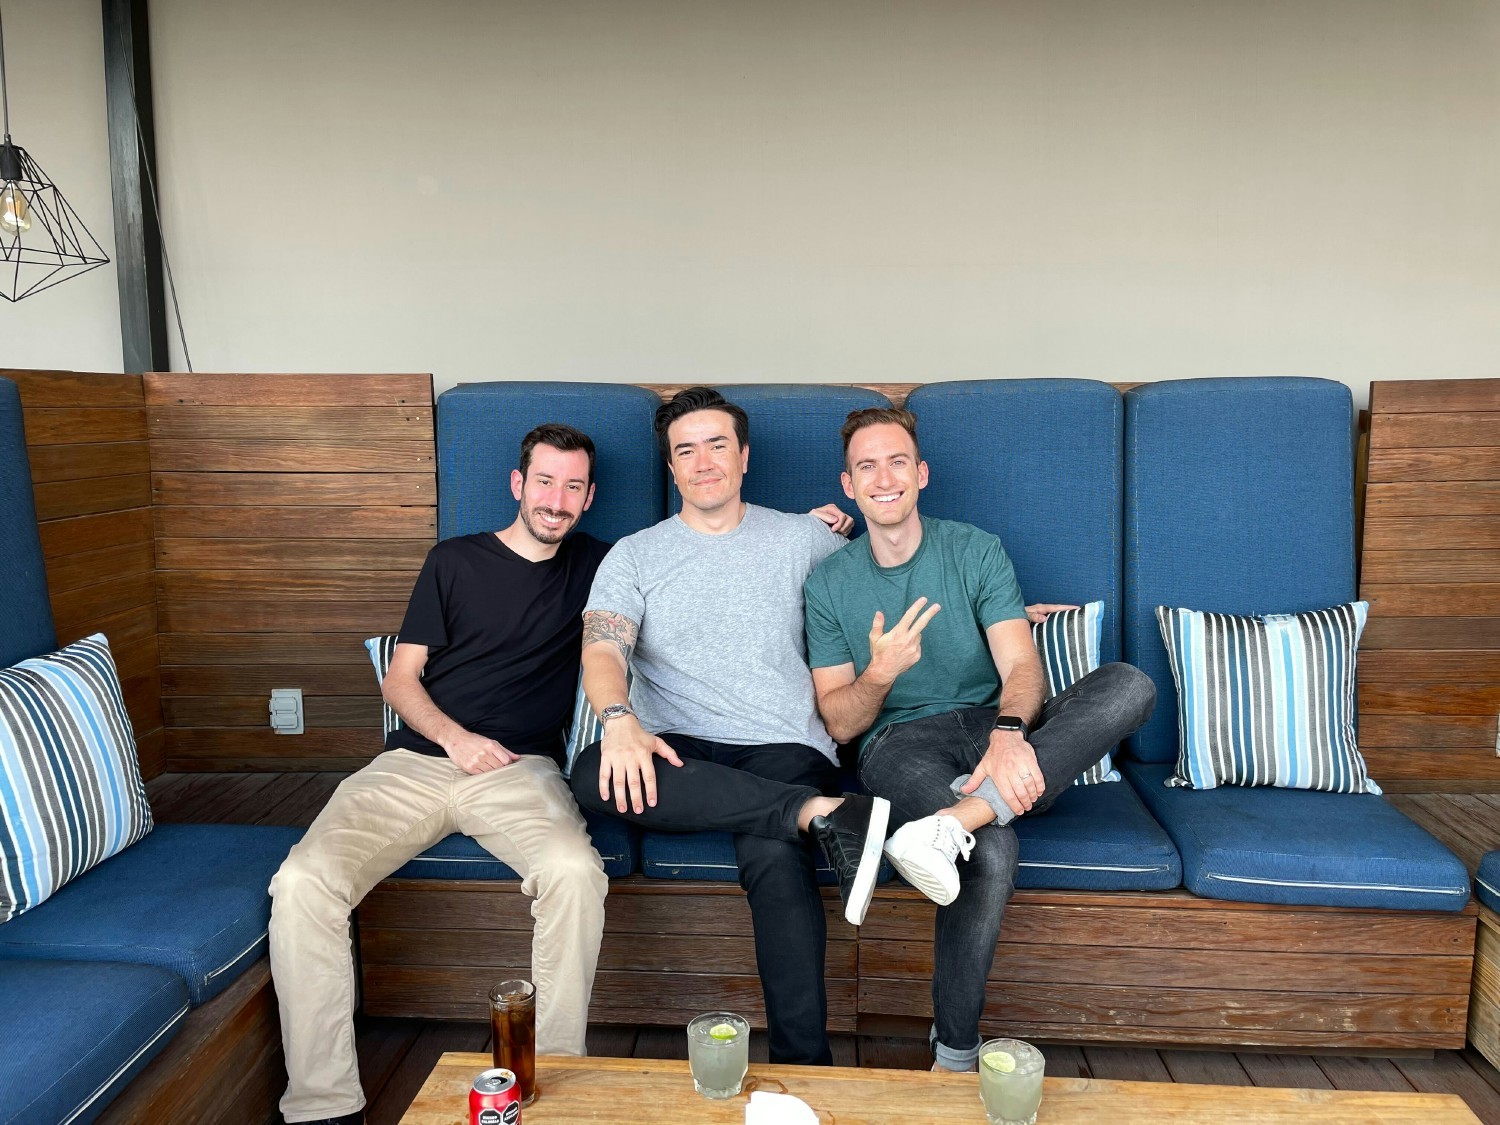 Director of Product, CFO, and CEO in DearDoc's Mexico office!